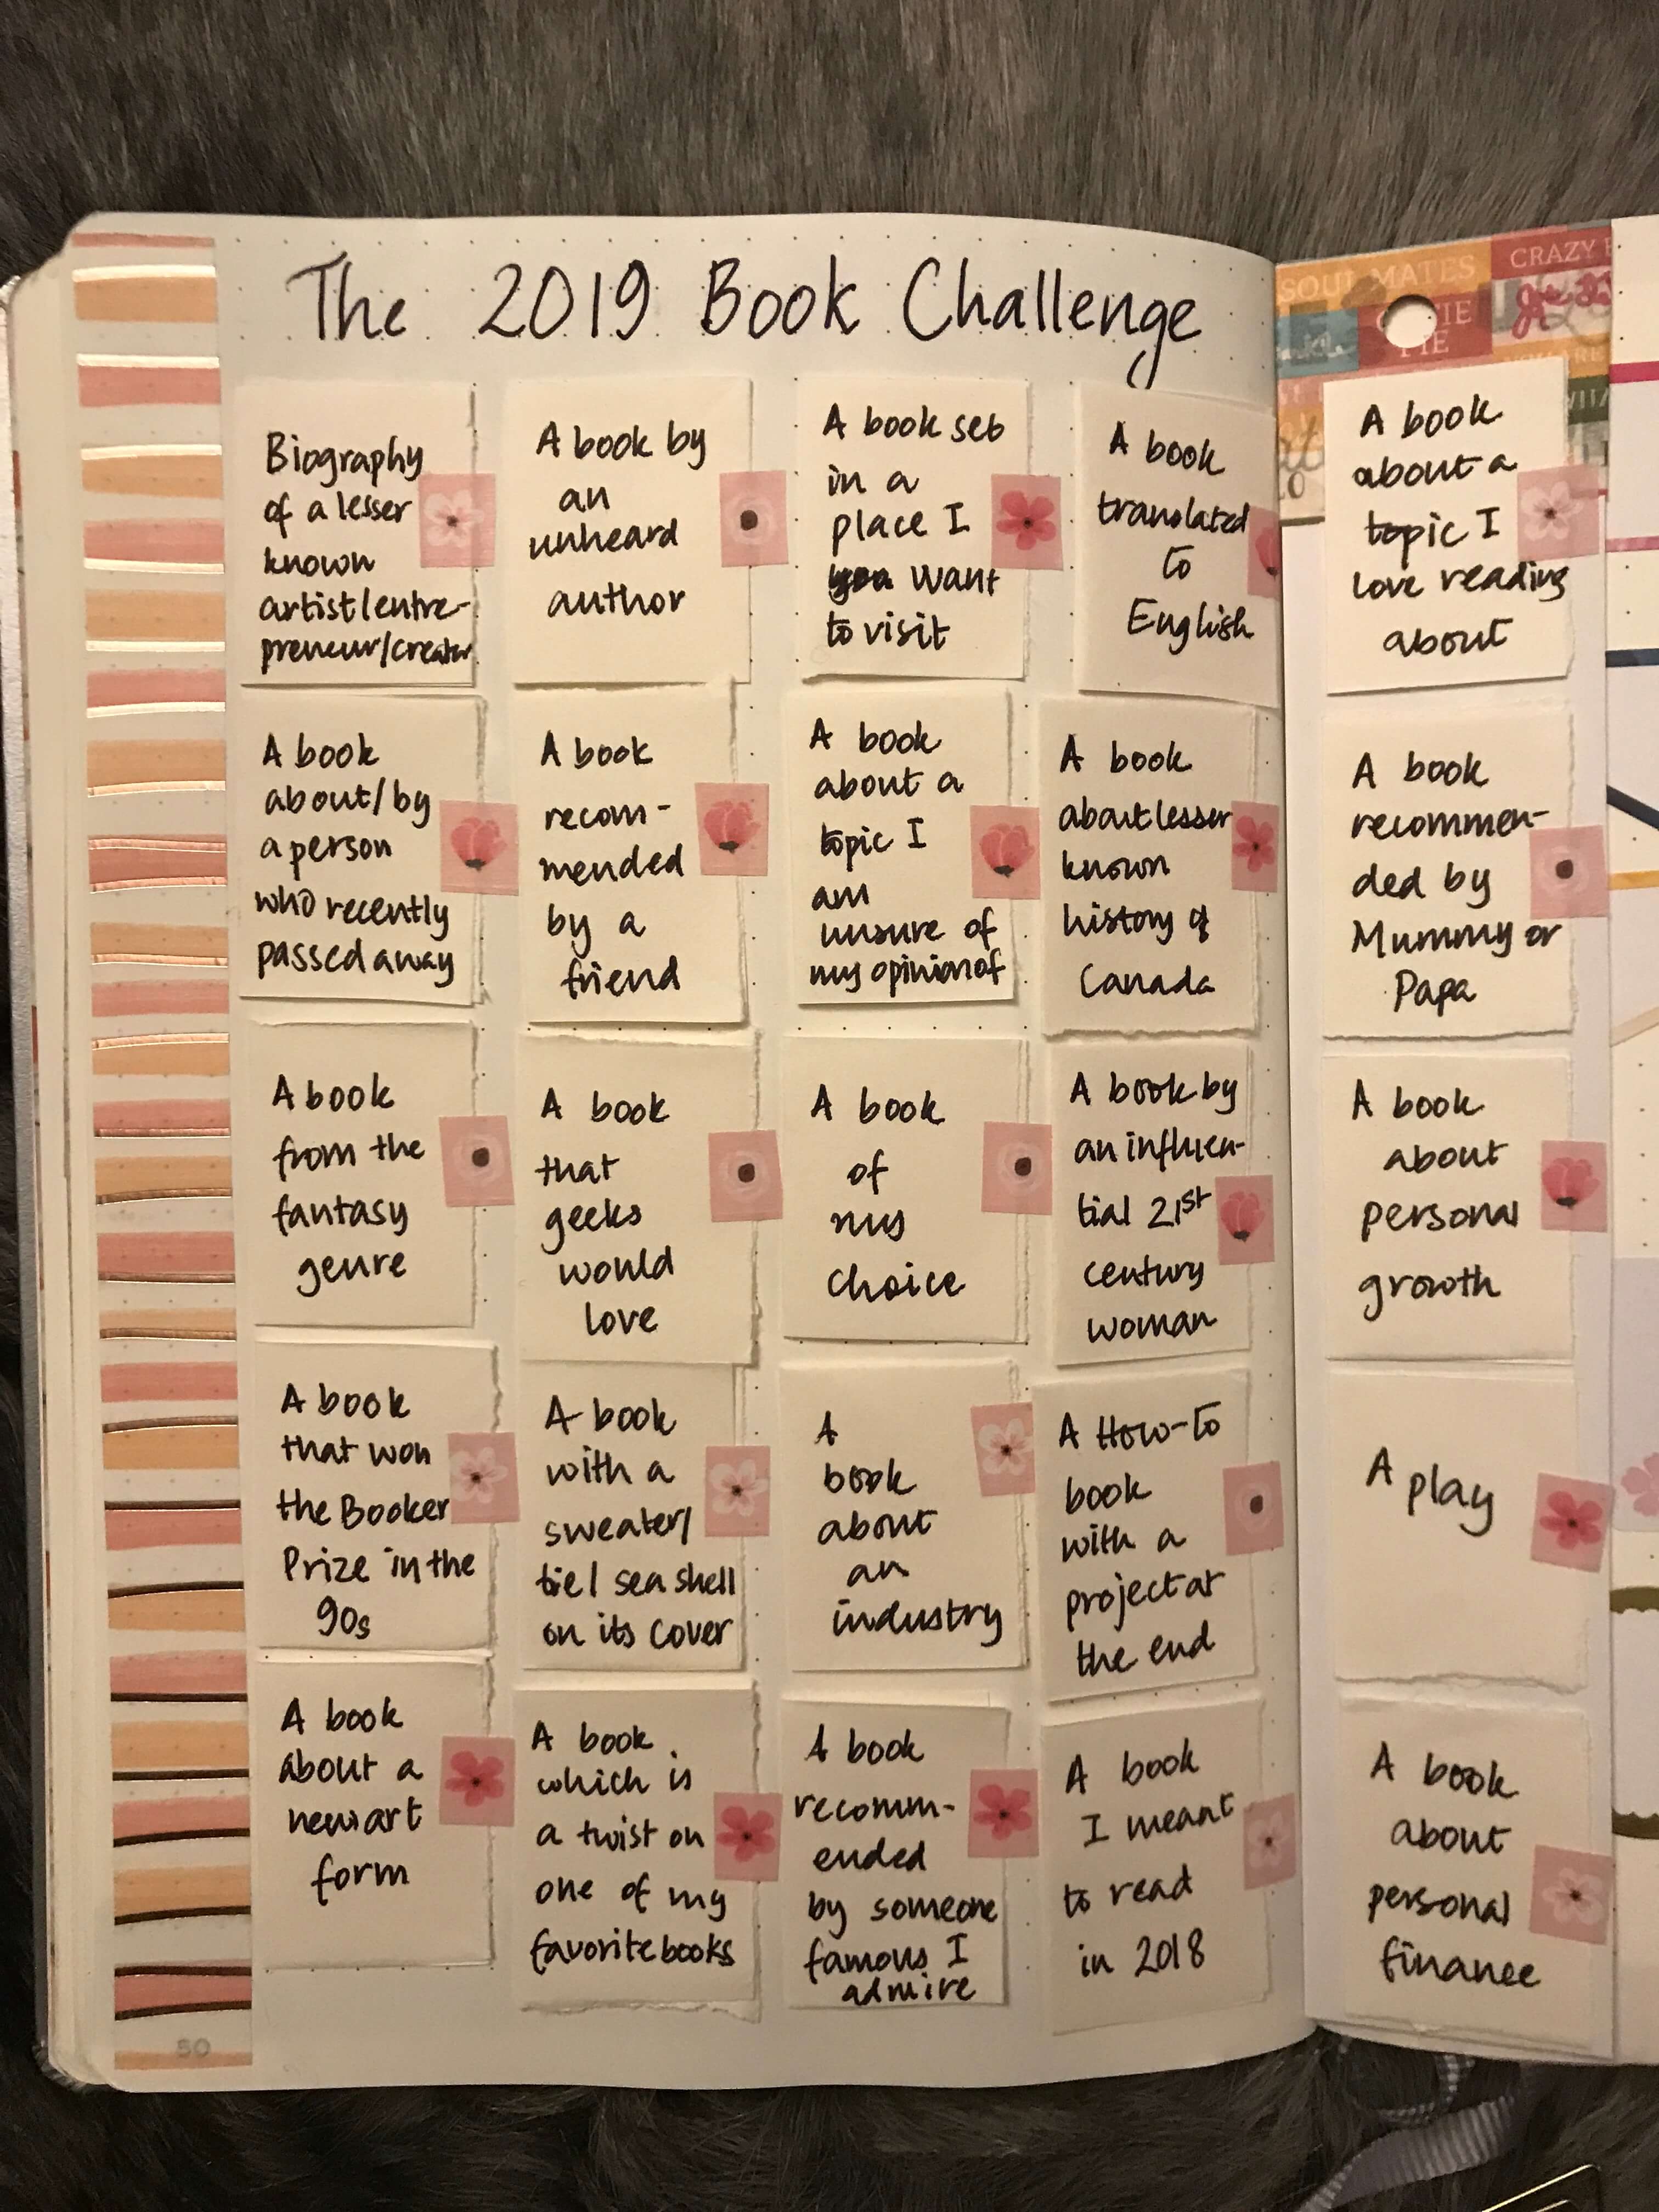 The book challenge